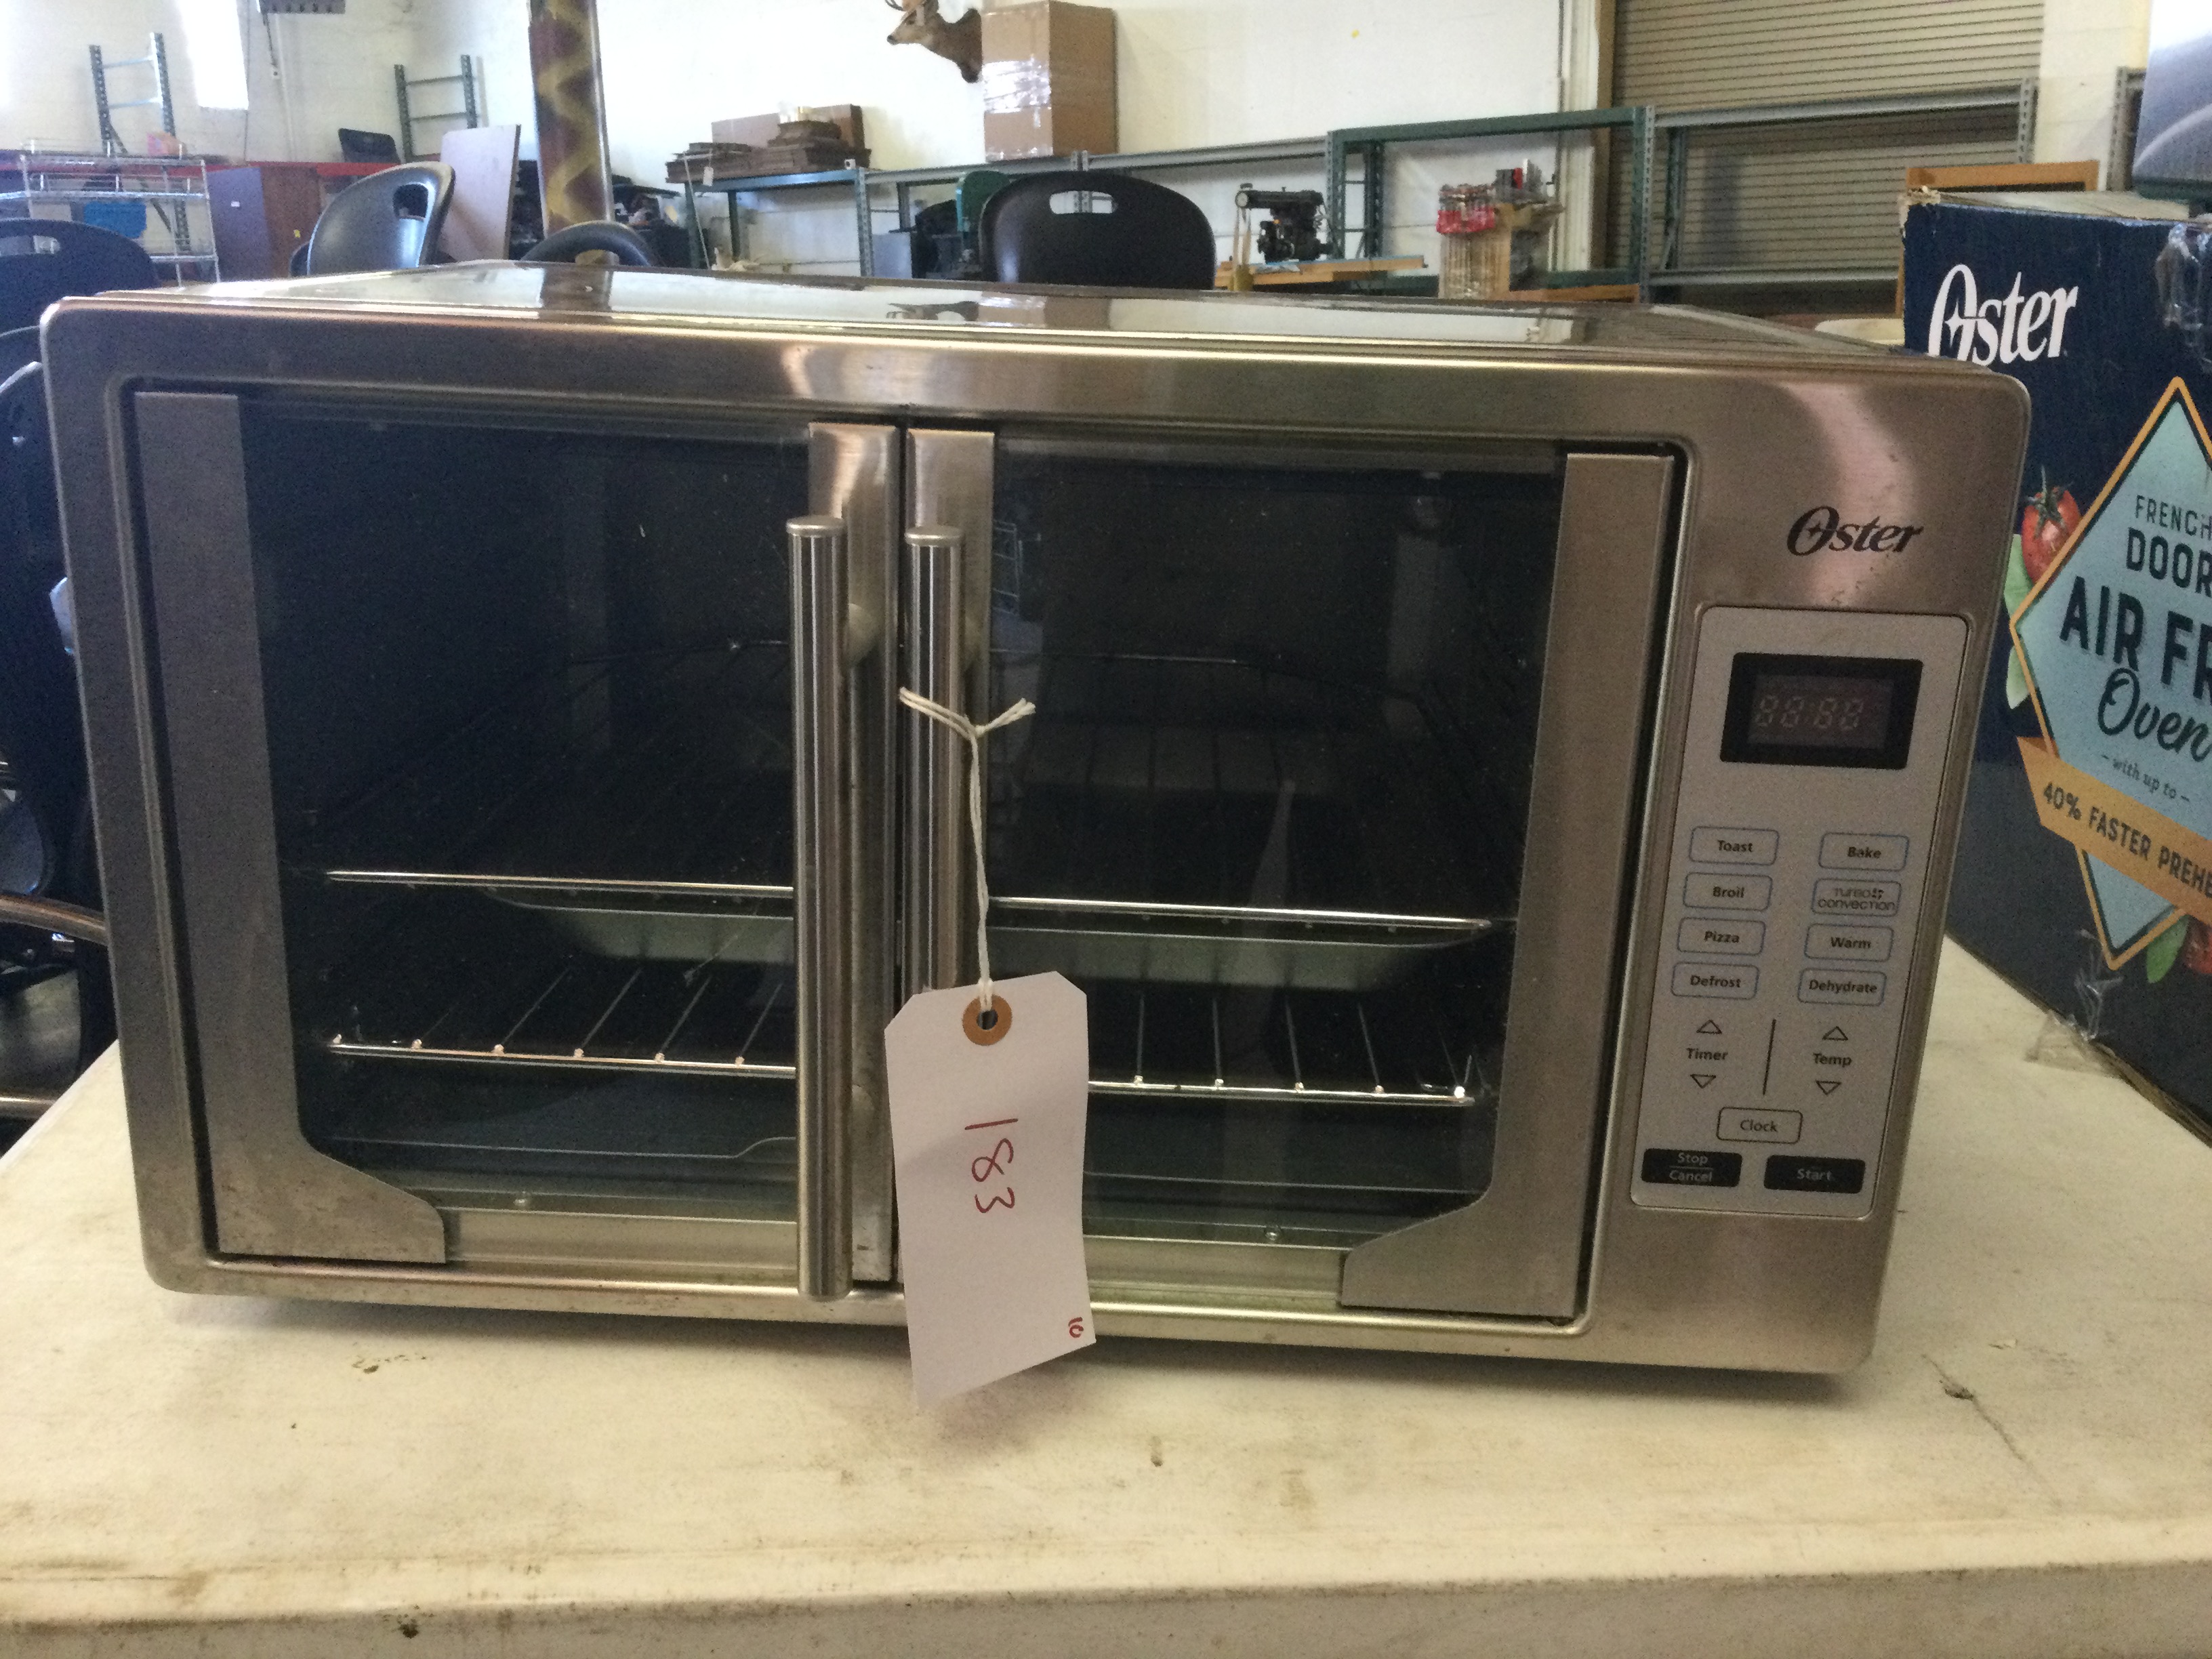 Oster French door Air Fry Oven, No box